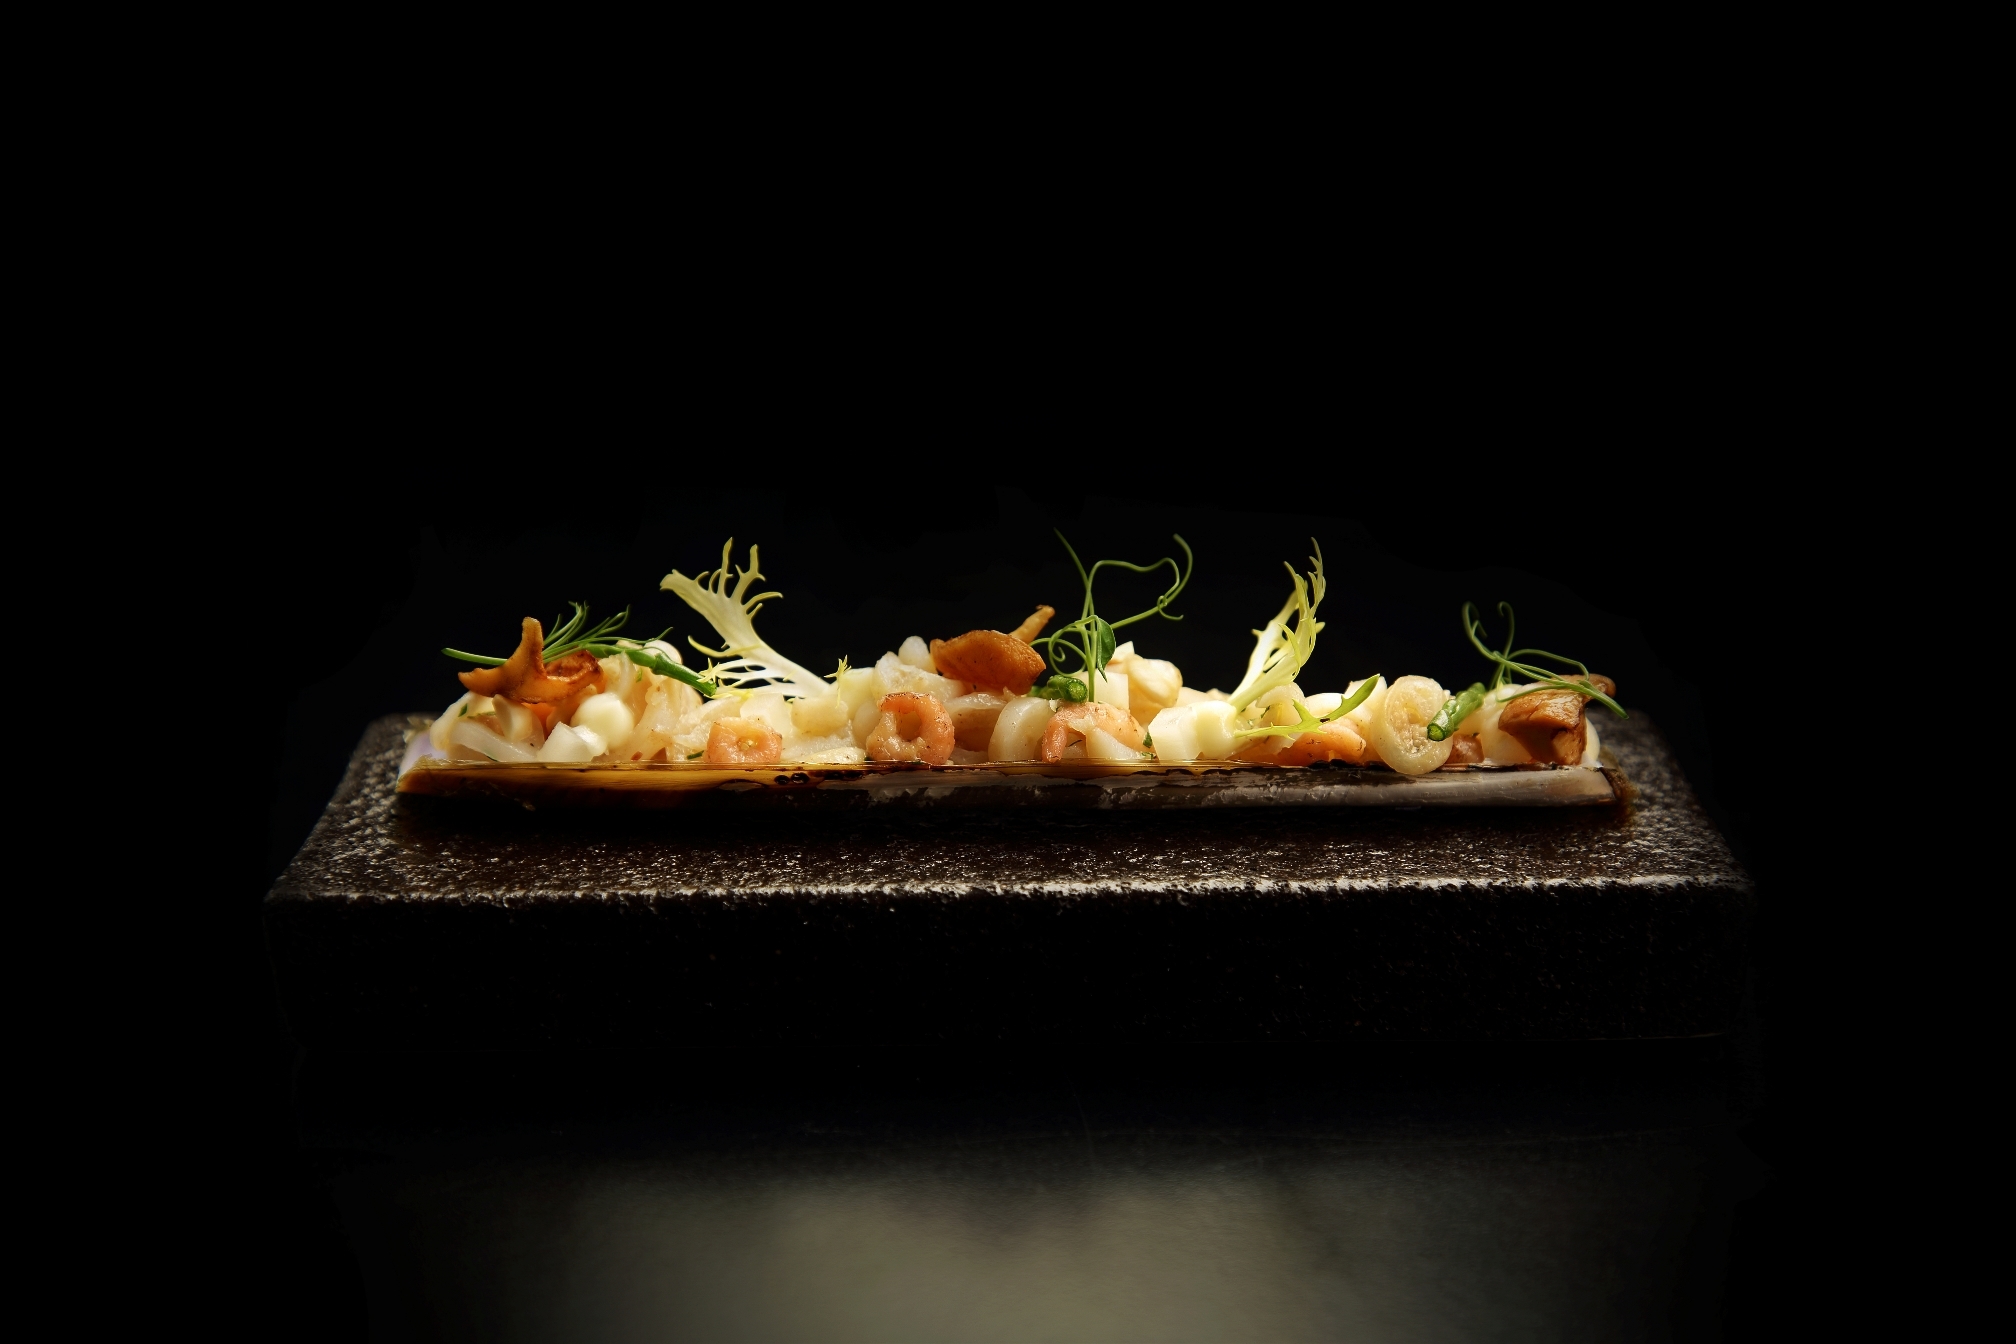 The Raby Hunt Restaurant At Summerhouse County Durham Razor Clam With Almond And Celeriac From The Tasting Menu